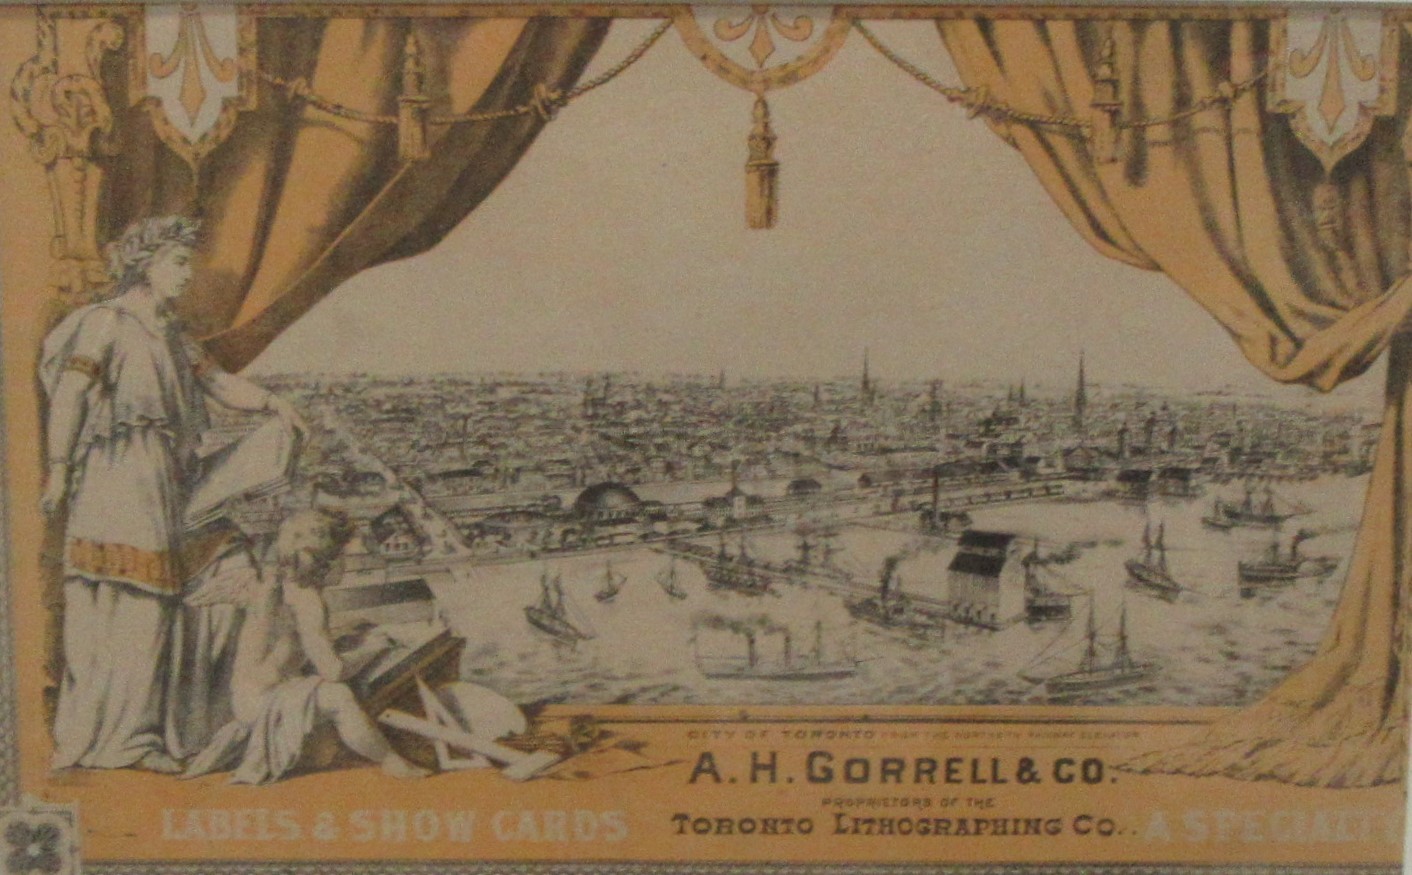 A.H.GORRELL & CO., PROPRIETORS OF TORONTO LITHOGRAPHING CO. City Of Toronto From The Northern Railway Elevator. lithograph